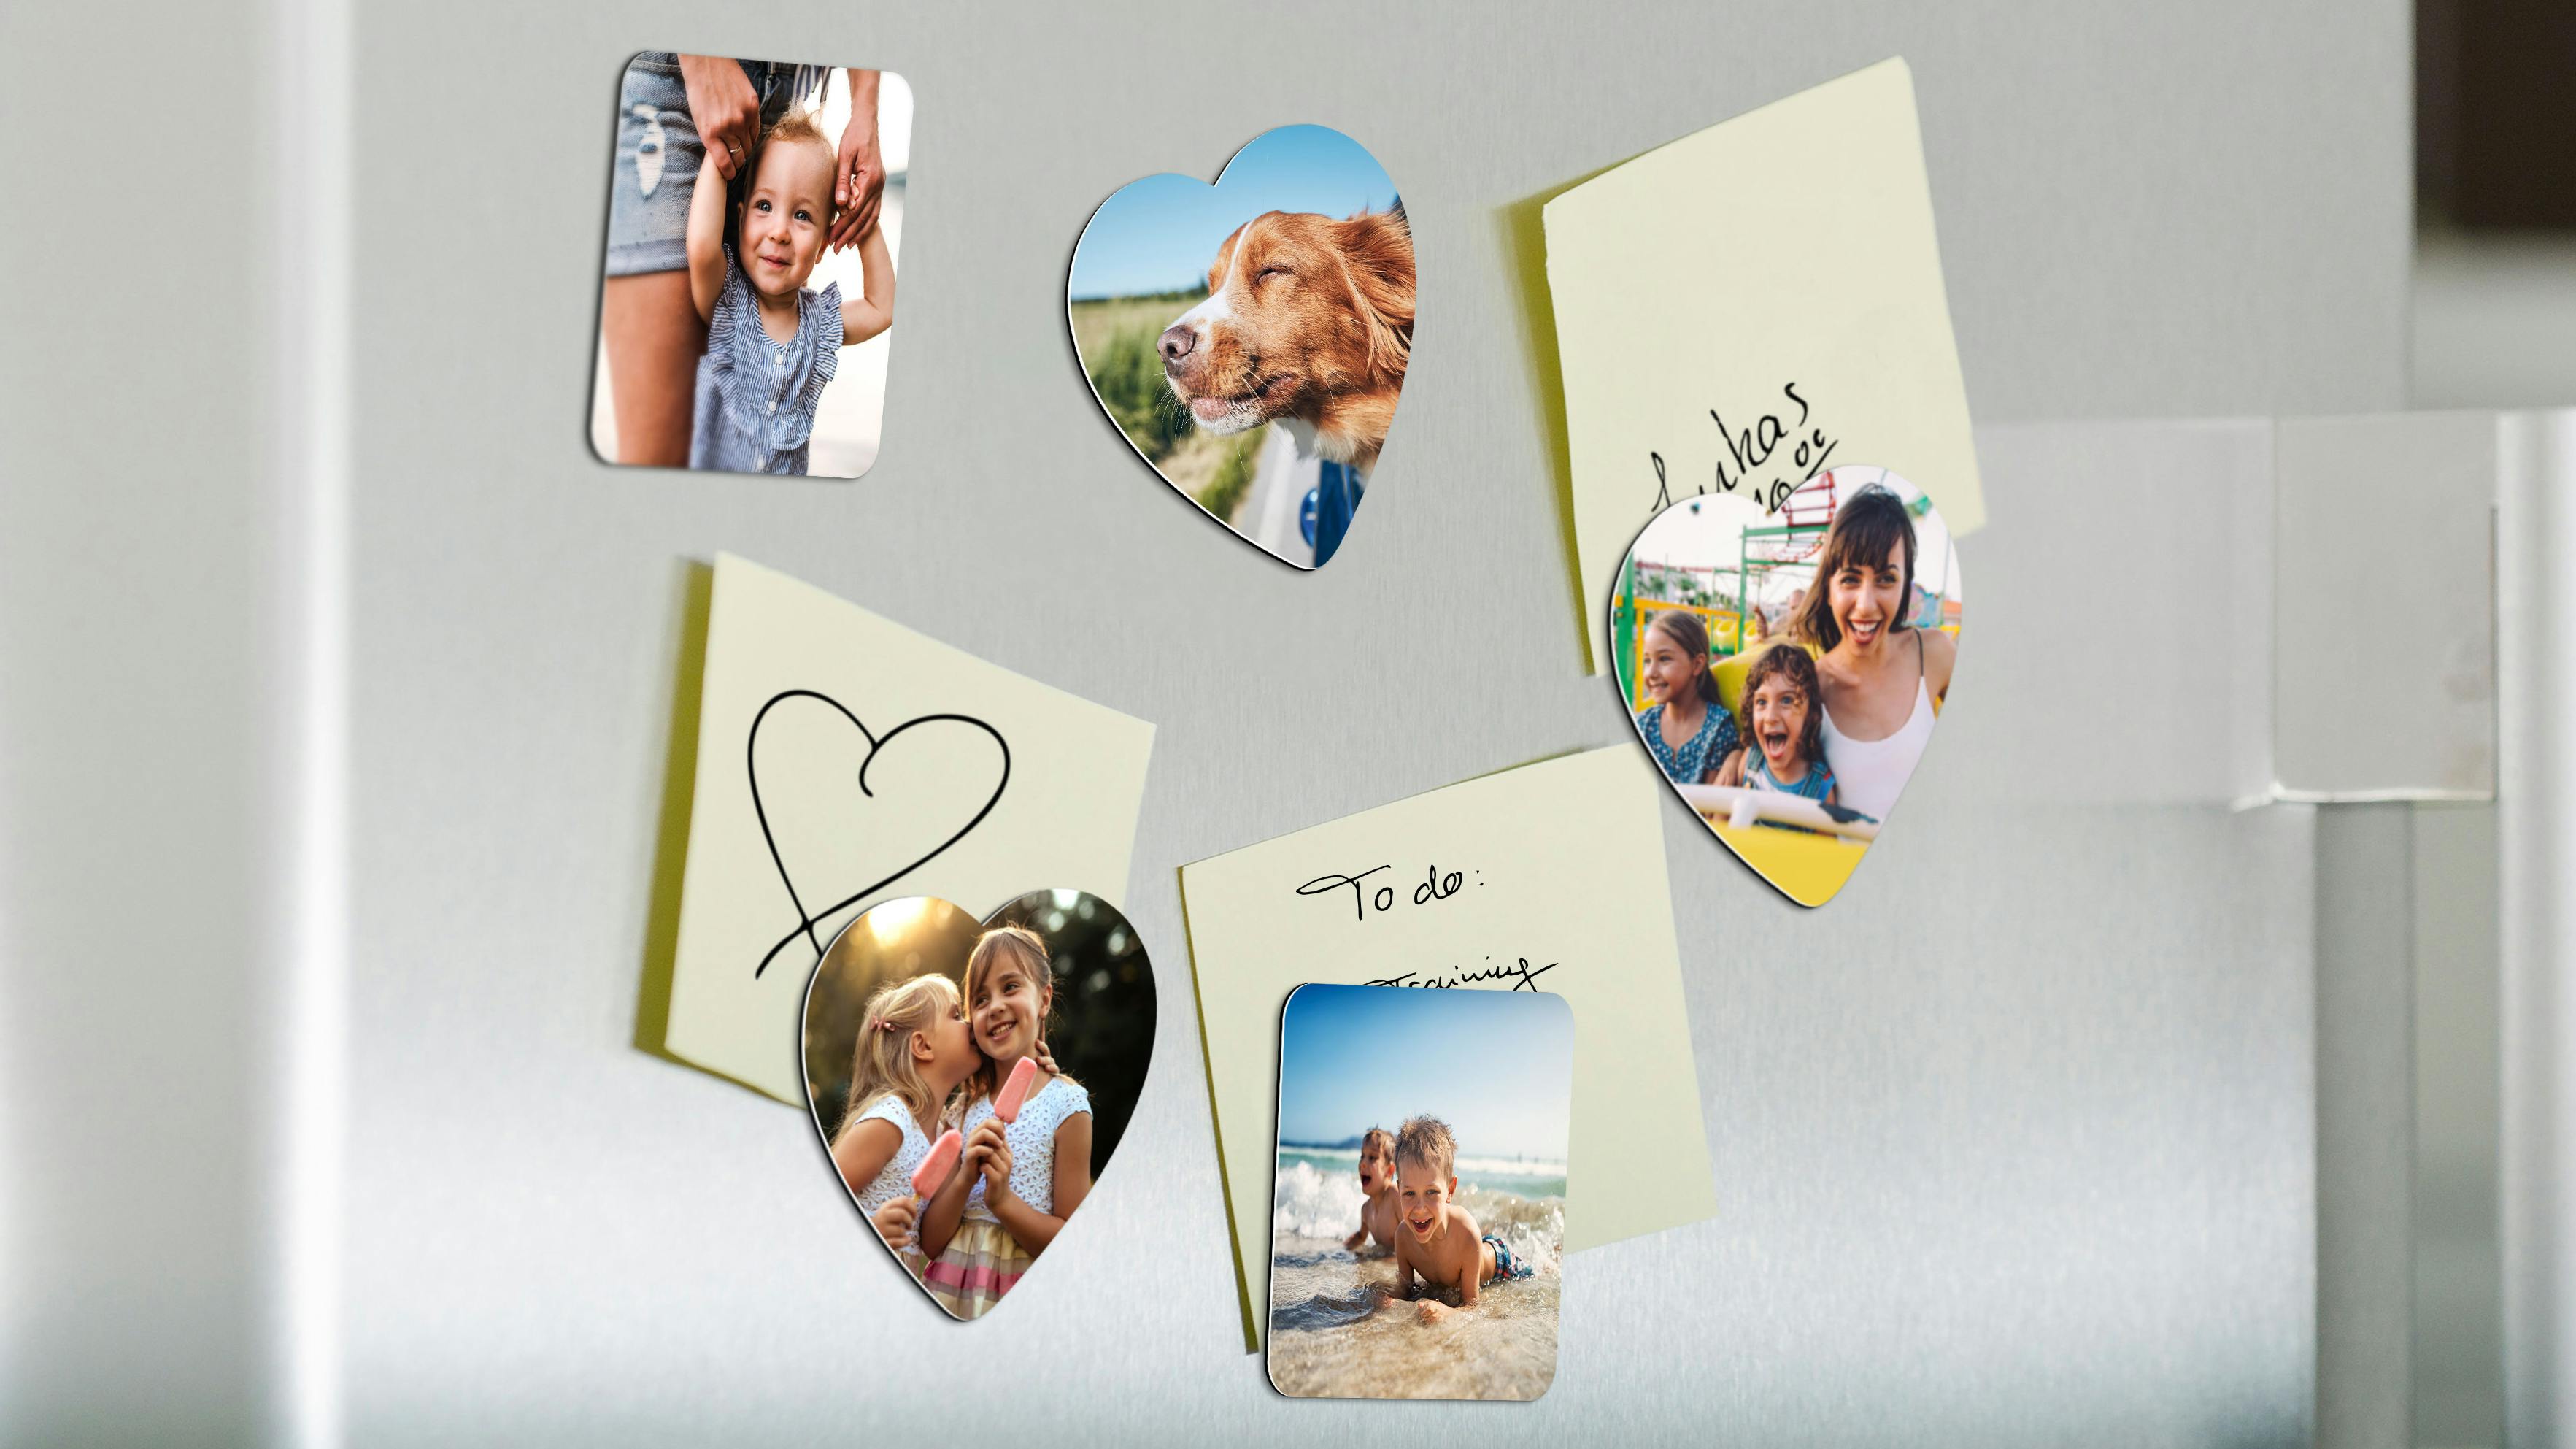 Mix of heart-shaped and square photo magnets on a fridge